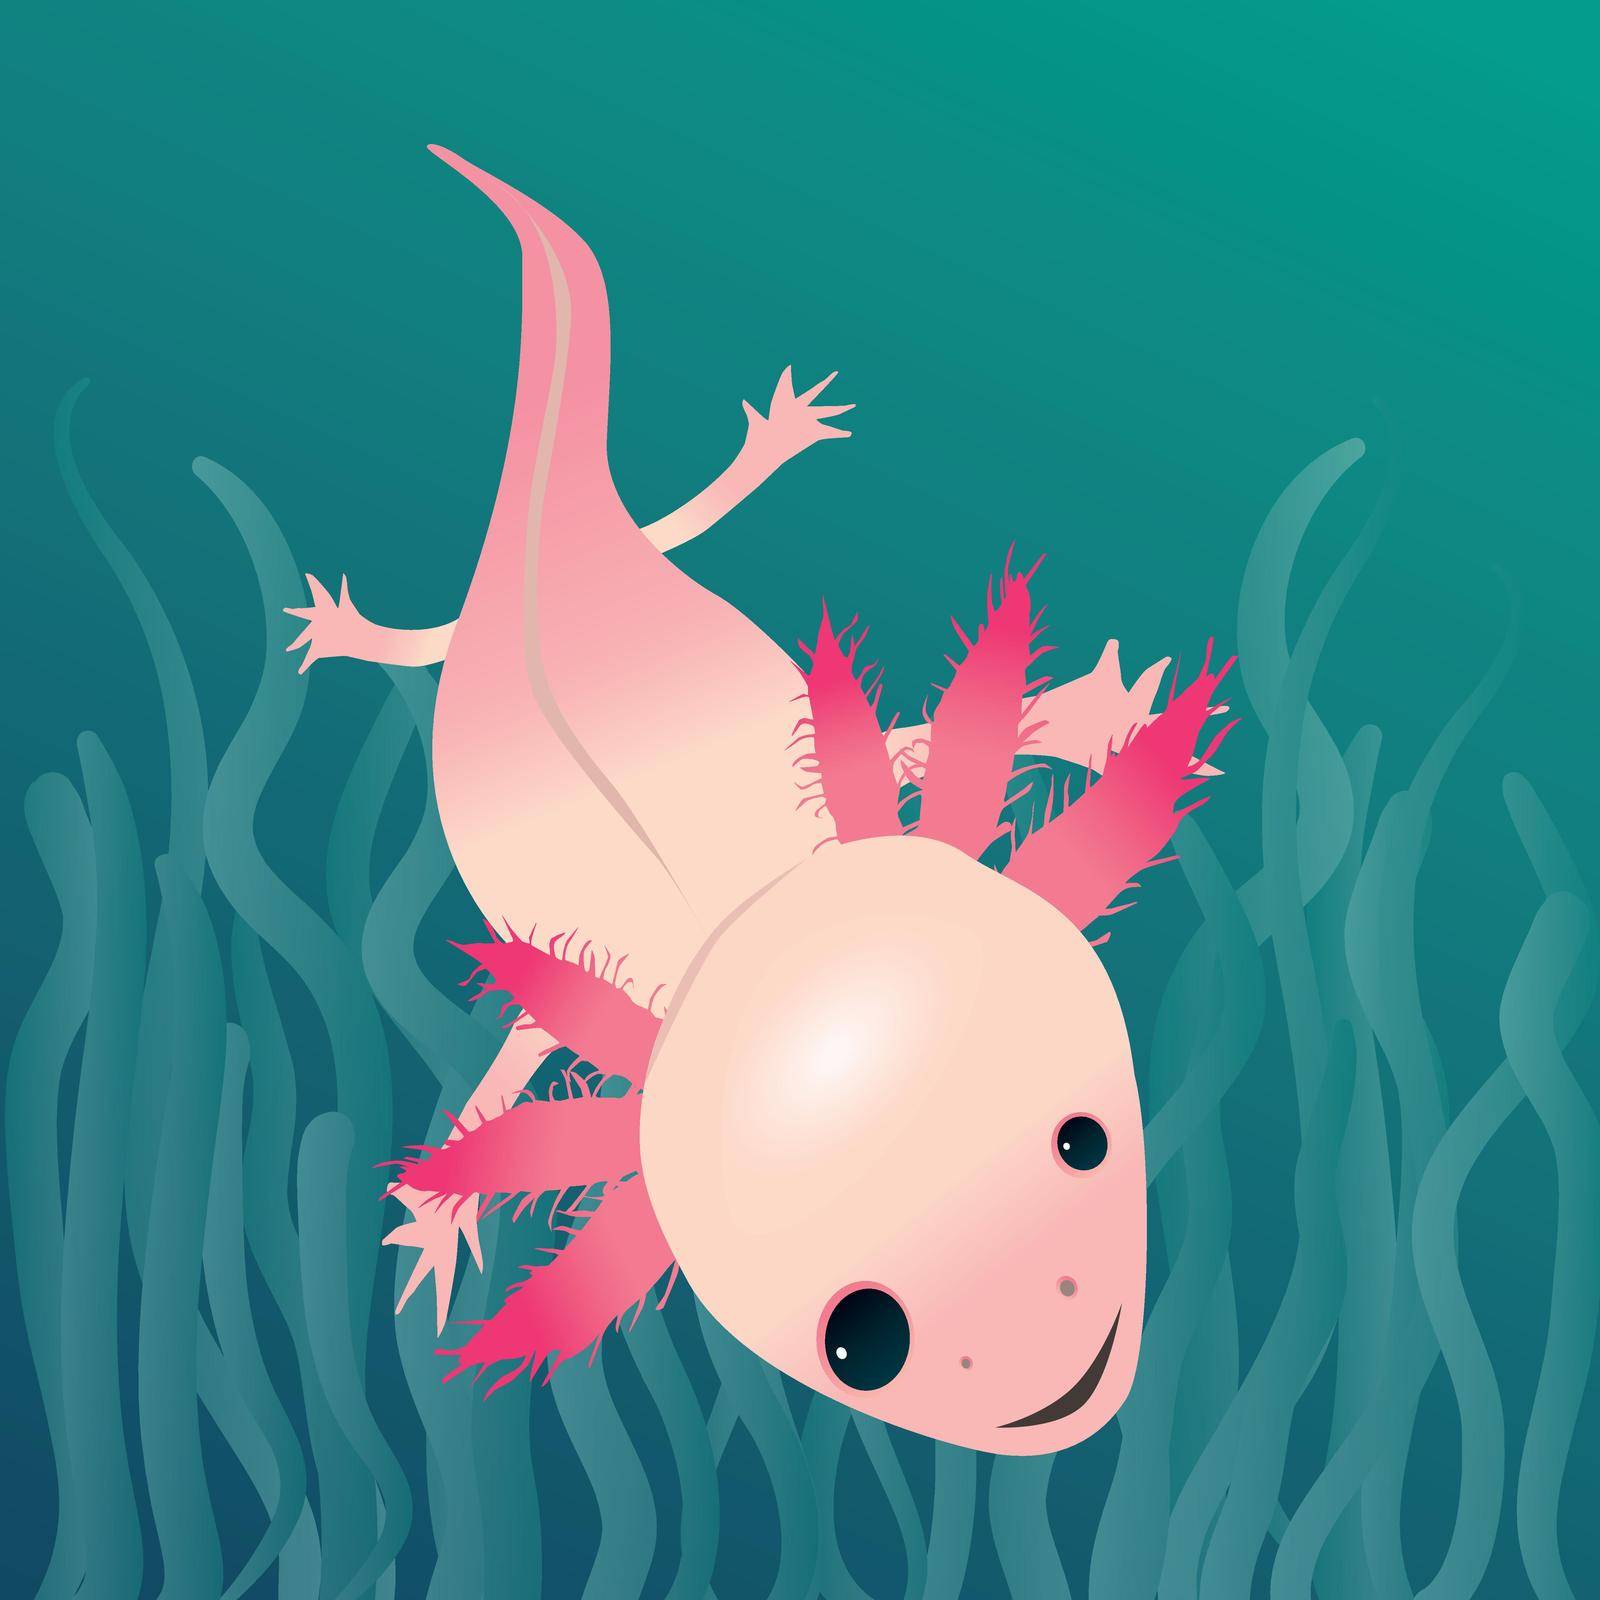 Swimming axolotl by Bwise